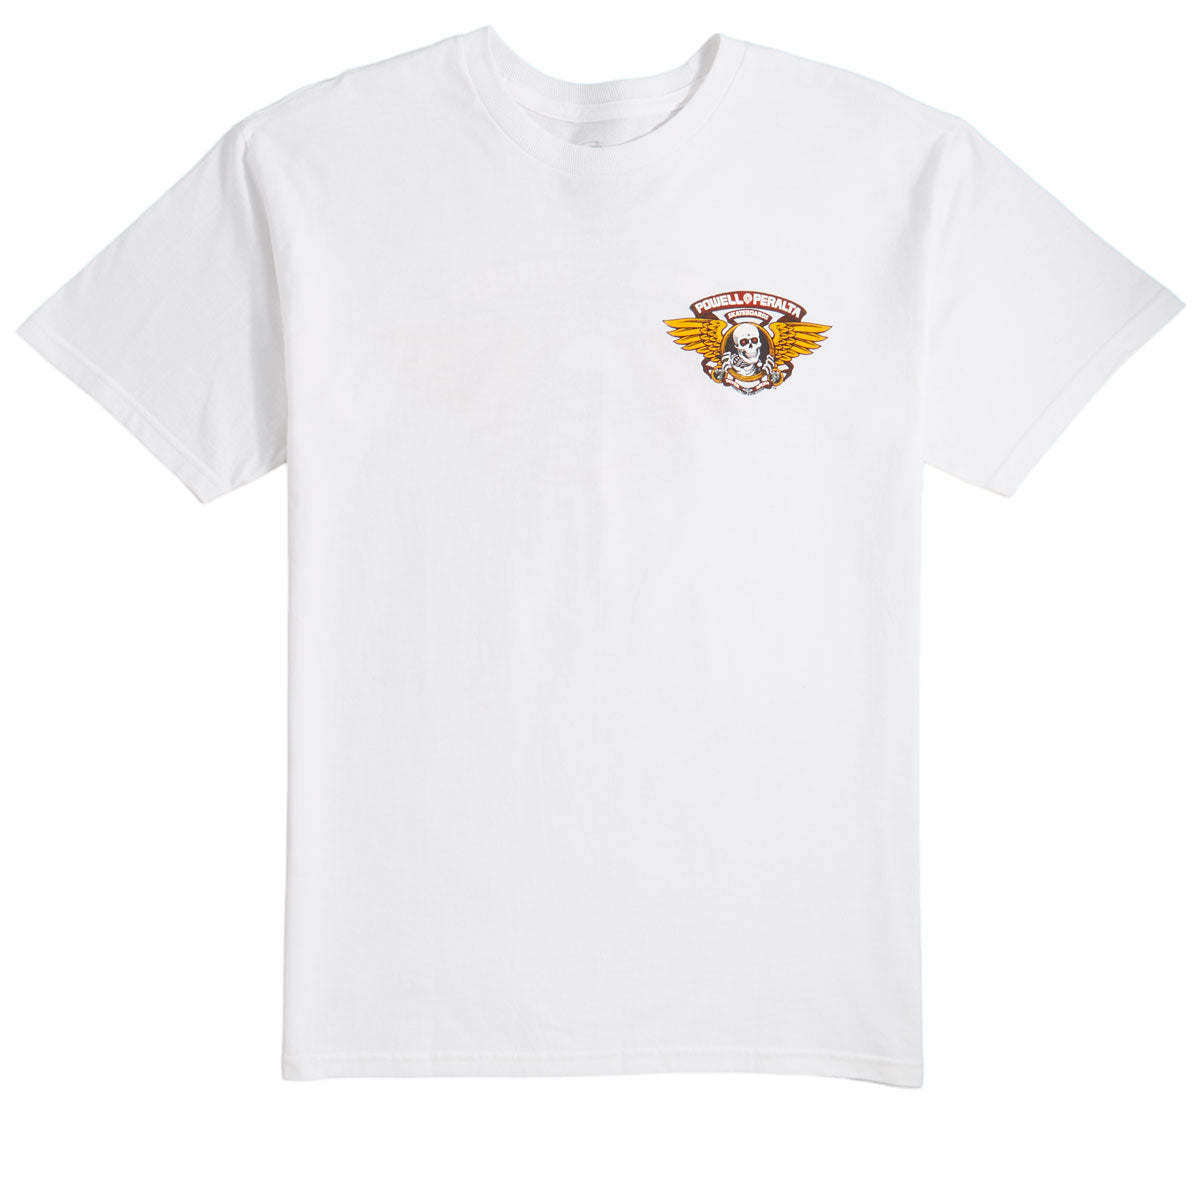 Powell-Peralta Winged Ripper T-Shirt - White image 1